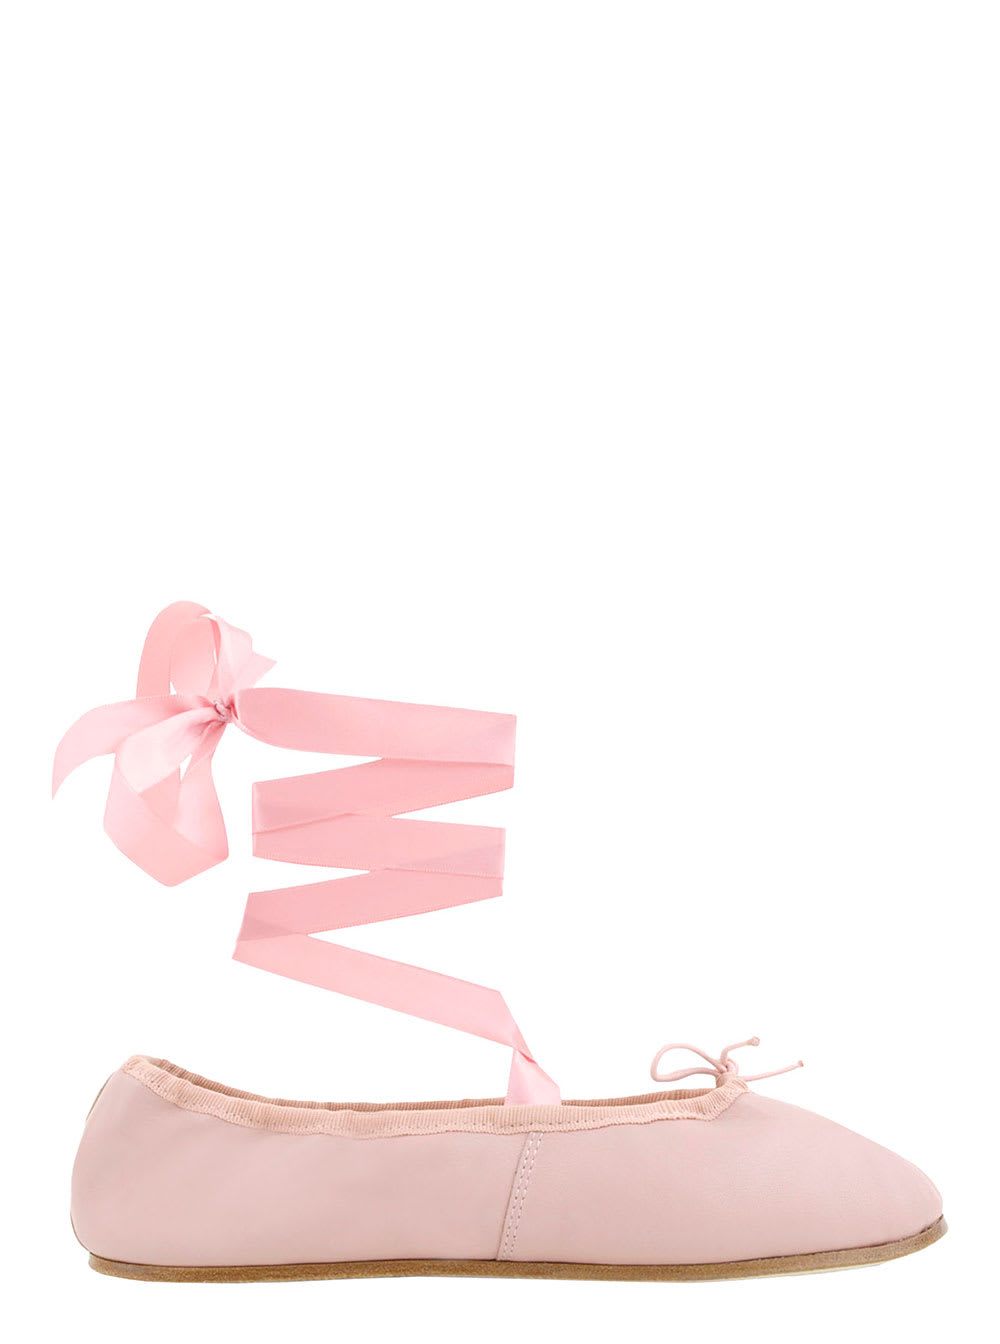 REPETTO SOFIA PINK BALLET FLATS WITH RIBBON IN LEATHER WOMAN